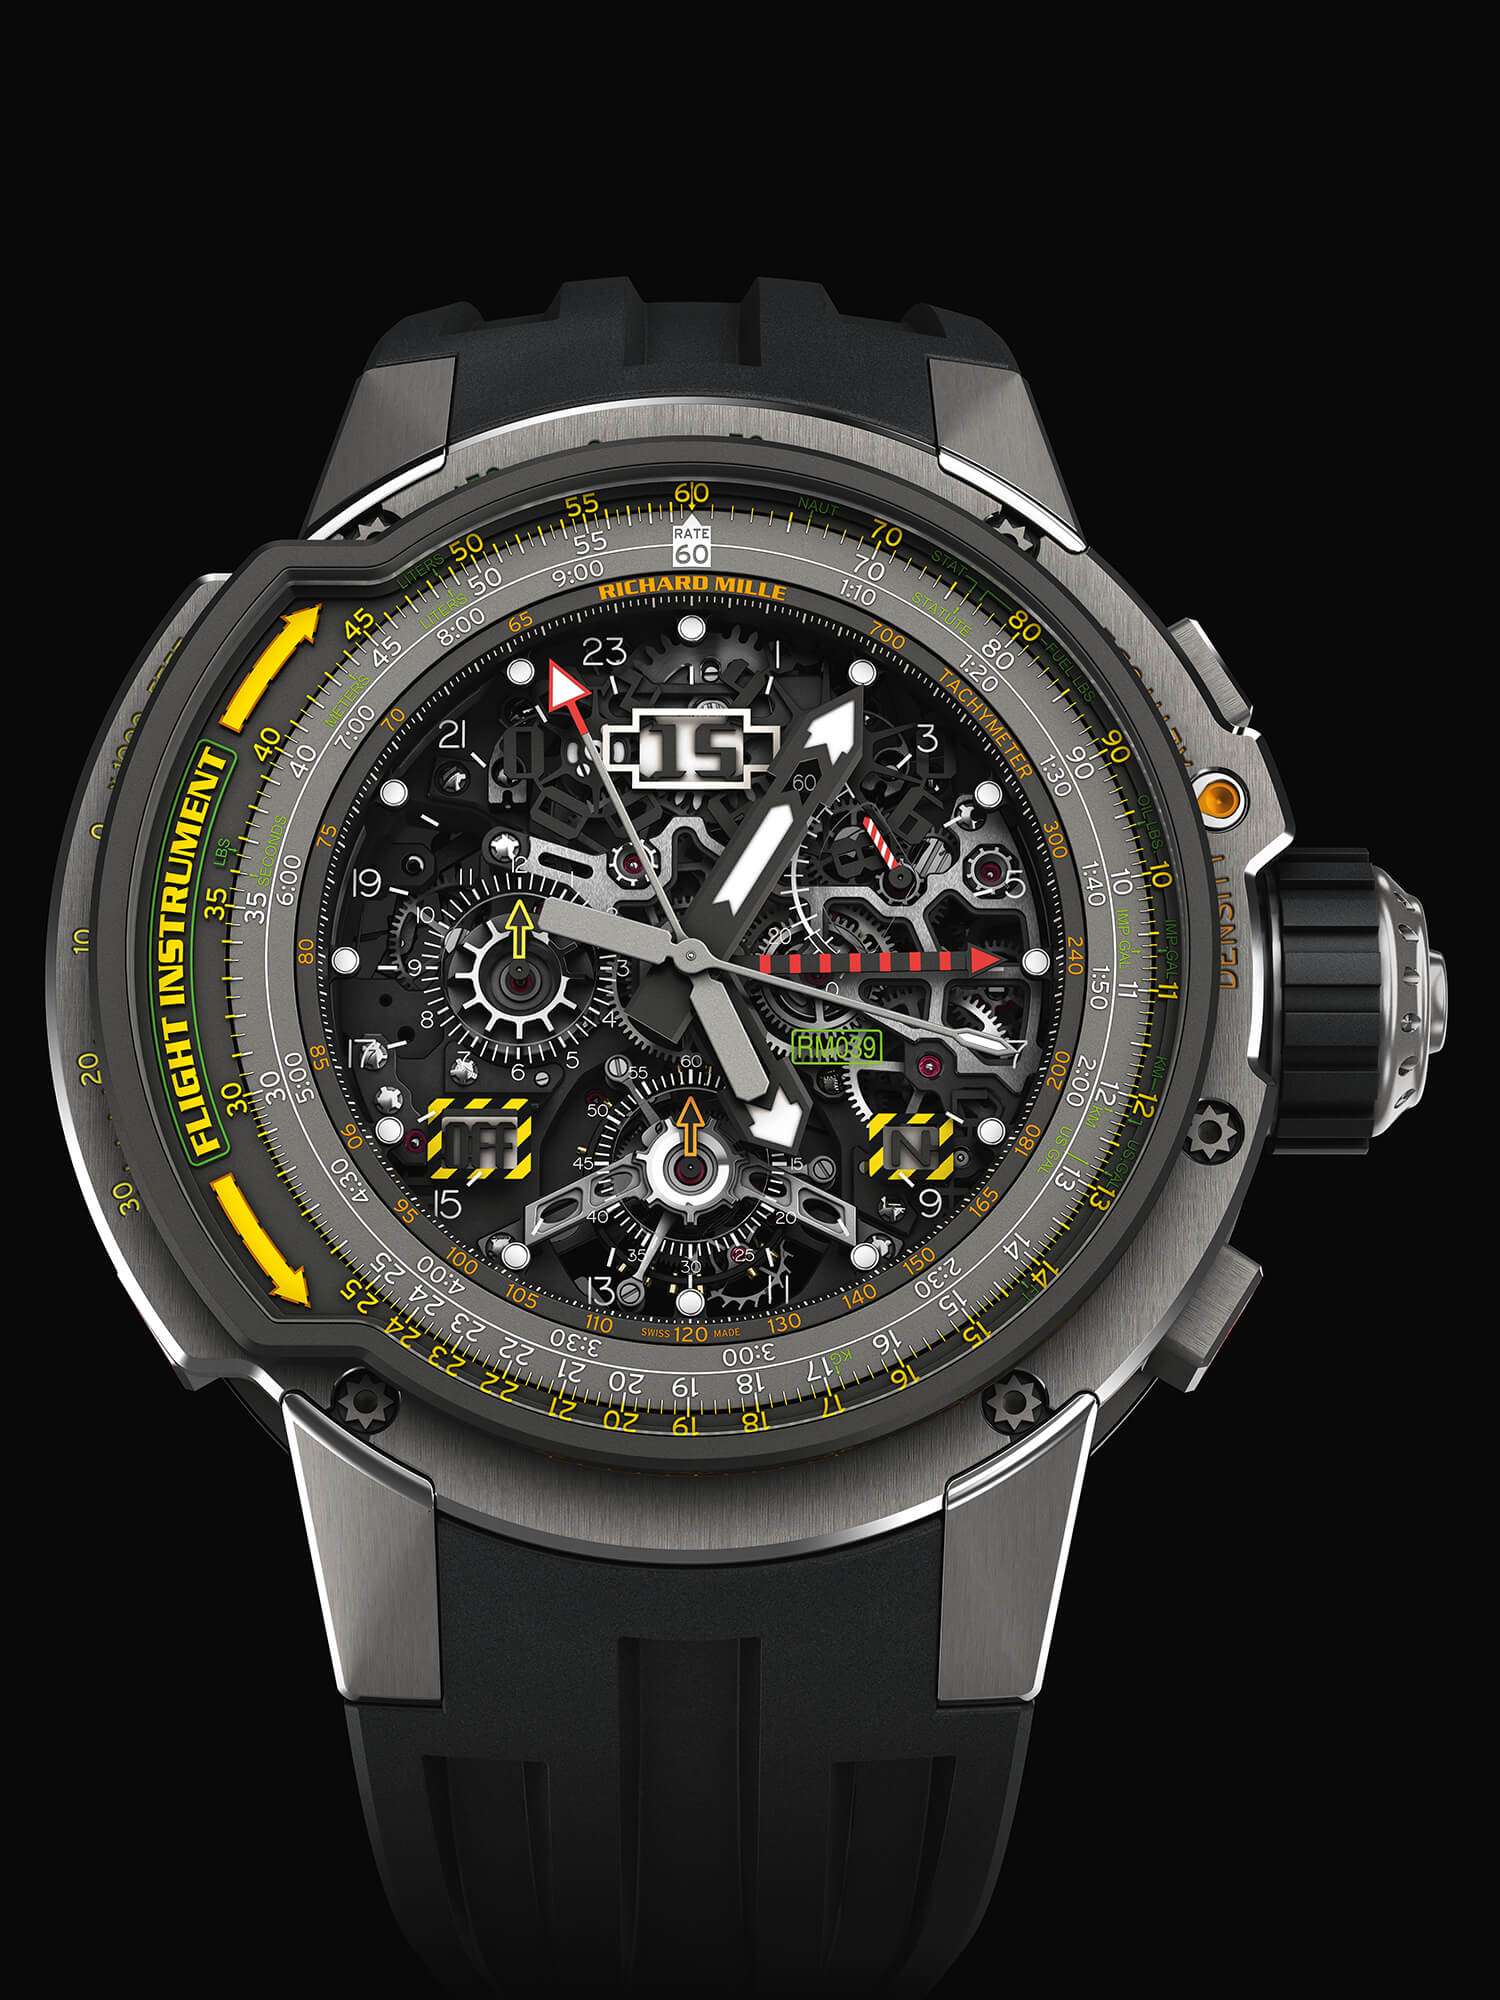 Replica Richard Mille RM 039 Watches Online With Discount 